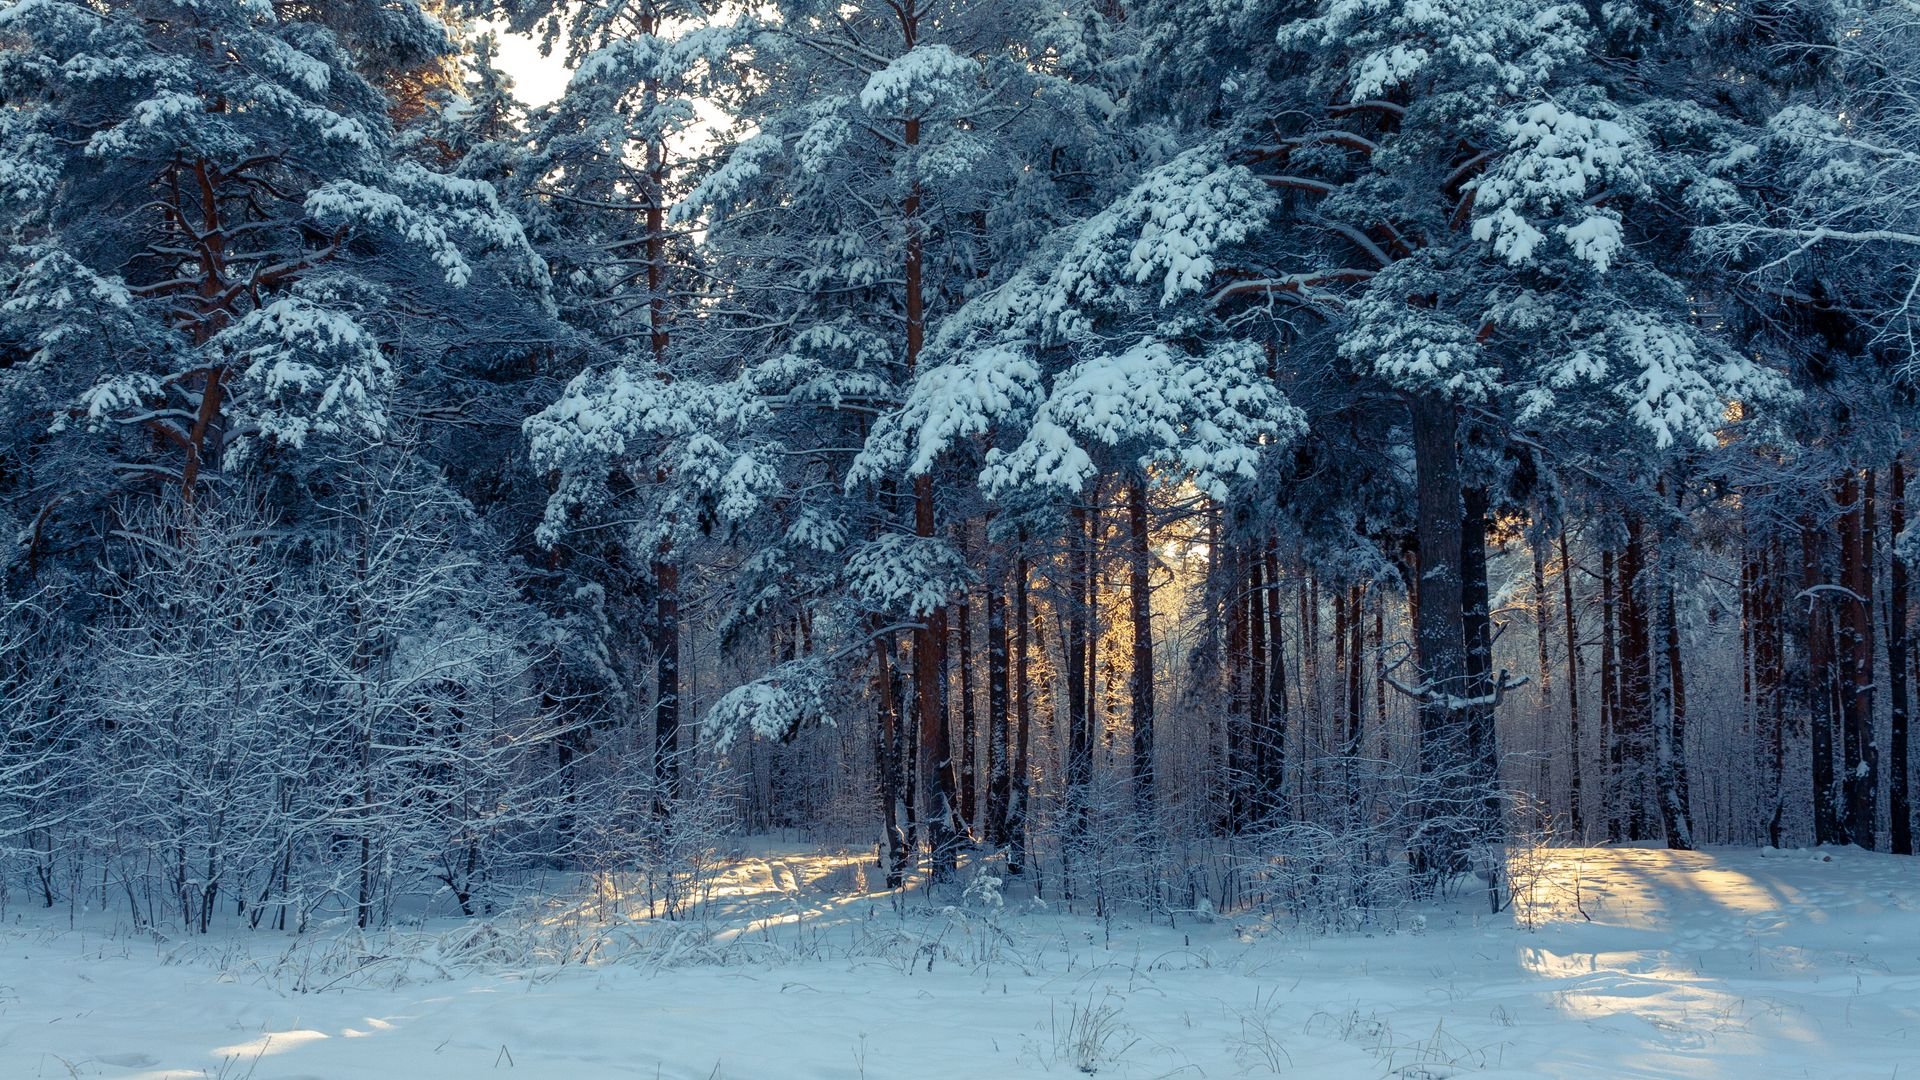 Download wallpaper 1920x1080 forest, winter, snow, trees, winter landscape full hd, hdtv, fhd, 1080p HD background